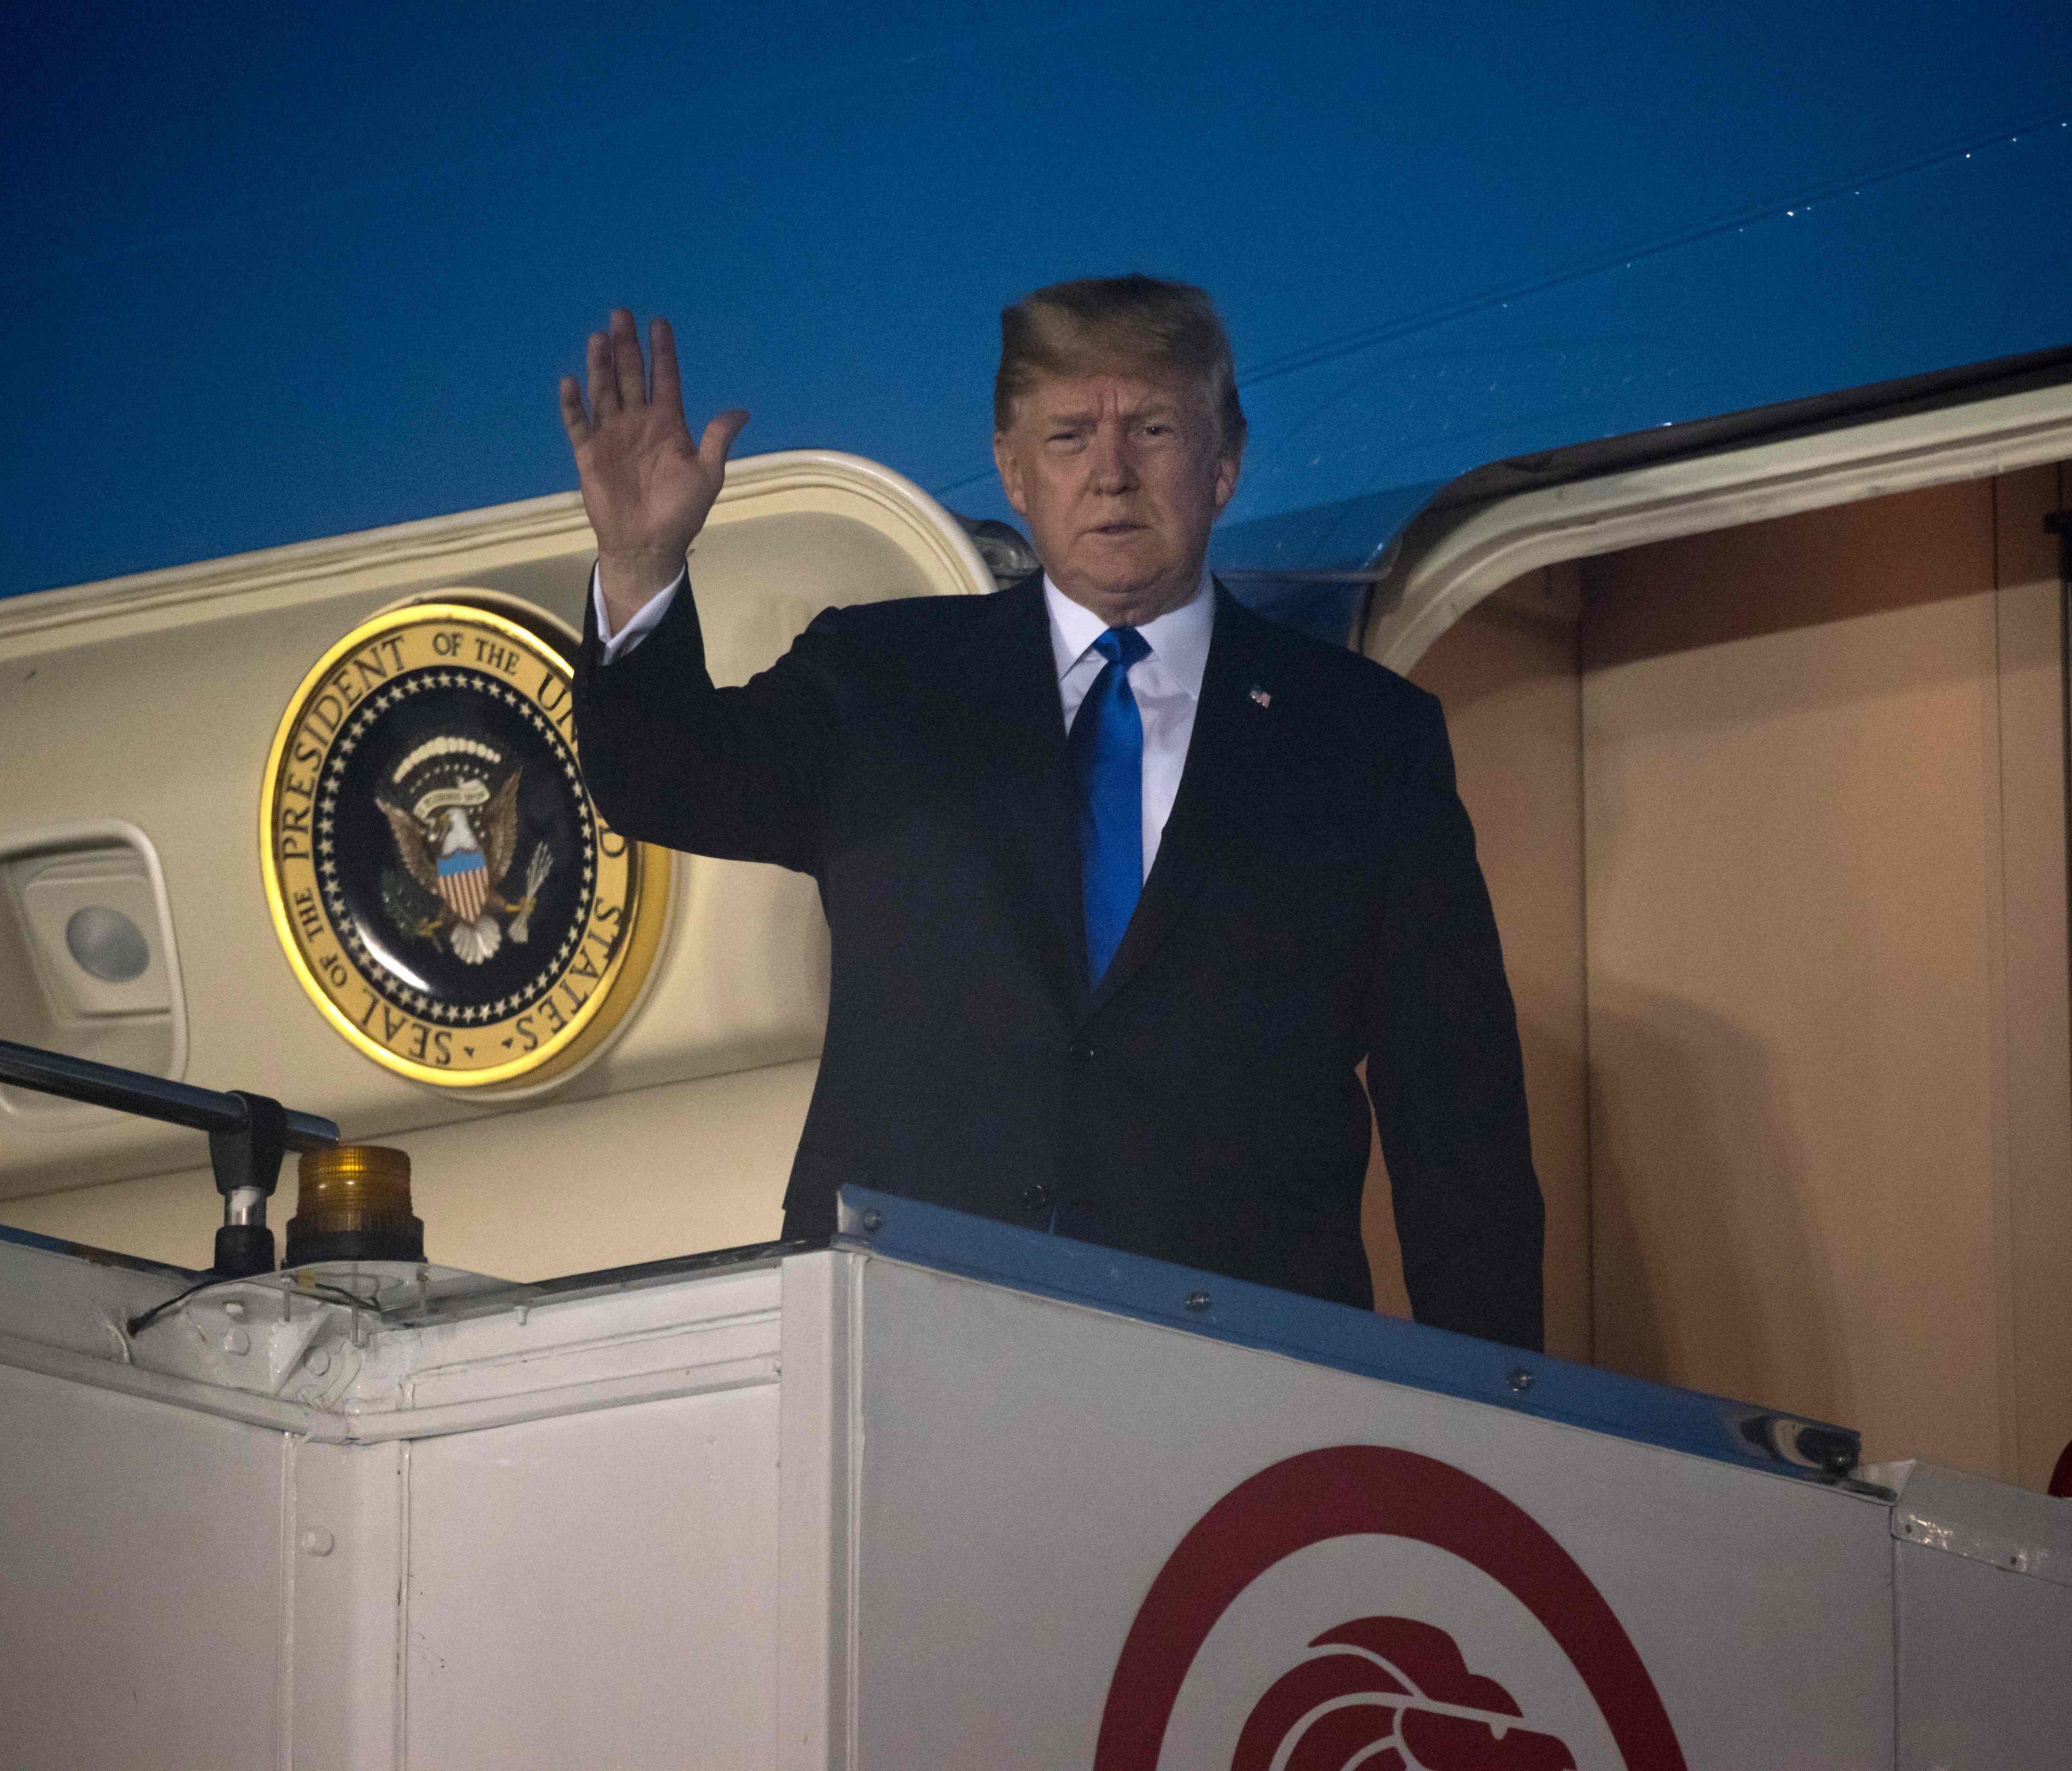 President Trump's arrival in Singapore.